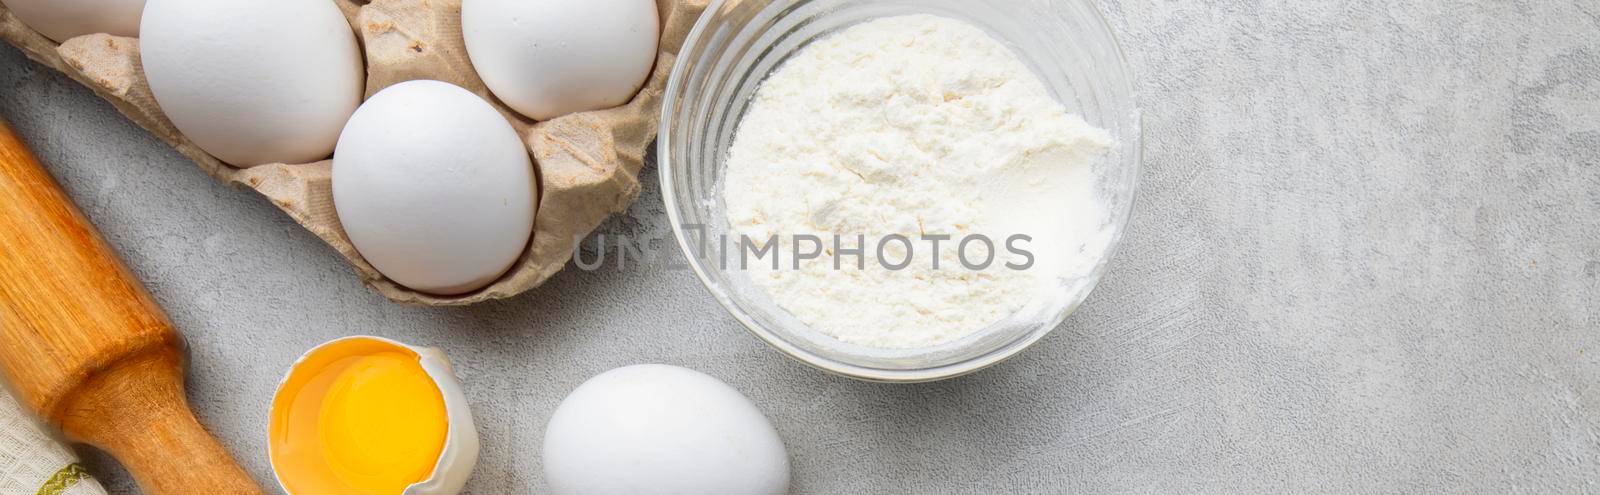 Baking cooking ingredients flour eggs rolling pin and kitchen textiles on gray concrete background. Cookie pie or cake recipe mockup by Sviatlana